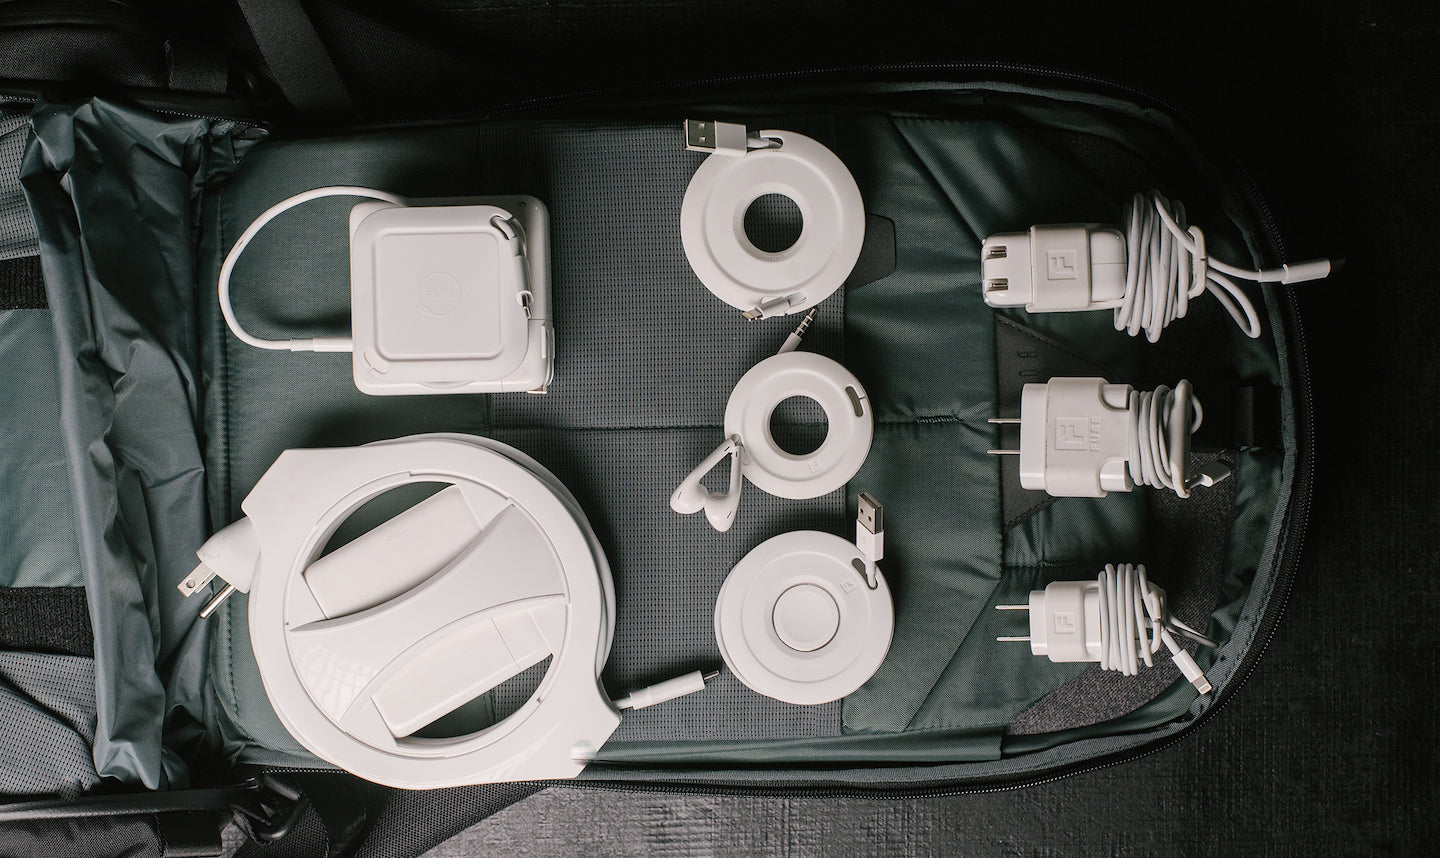 Organized Traveling backpack with cable management products